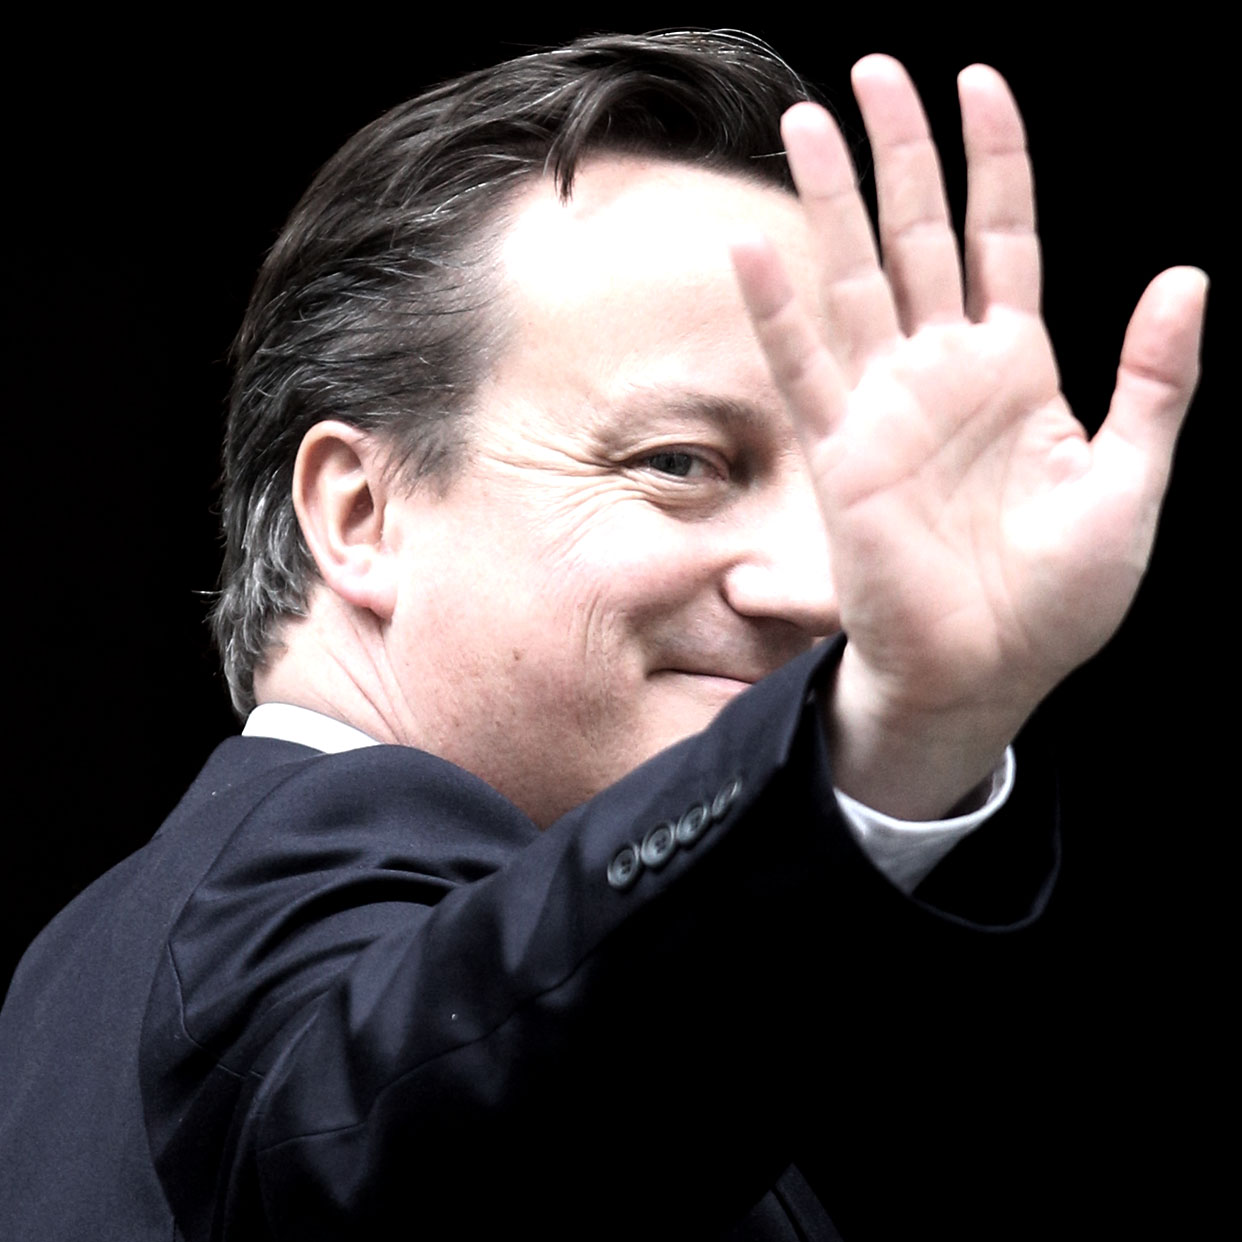 LONDON, ENGLAND - MAY 10:British Prime Minister David Cameron waves as he enters Number 10 Downing Street on May 10, 2012 in London, England. Andy Coulson, a former editor of the News of the 